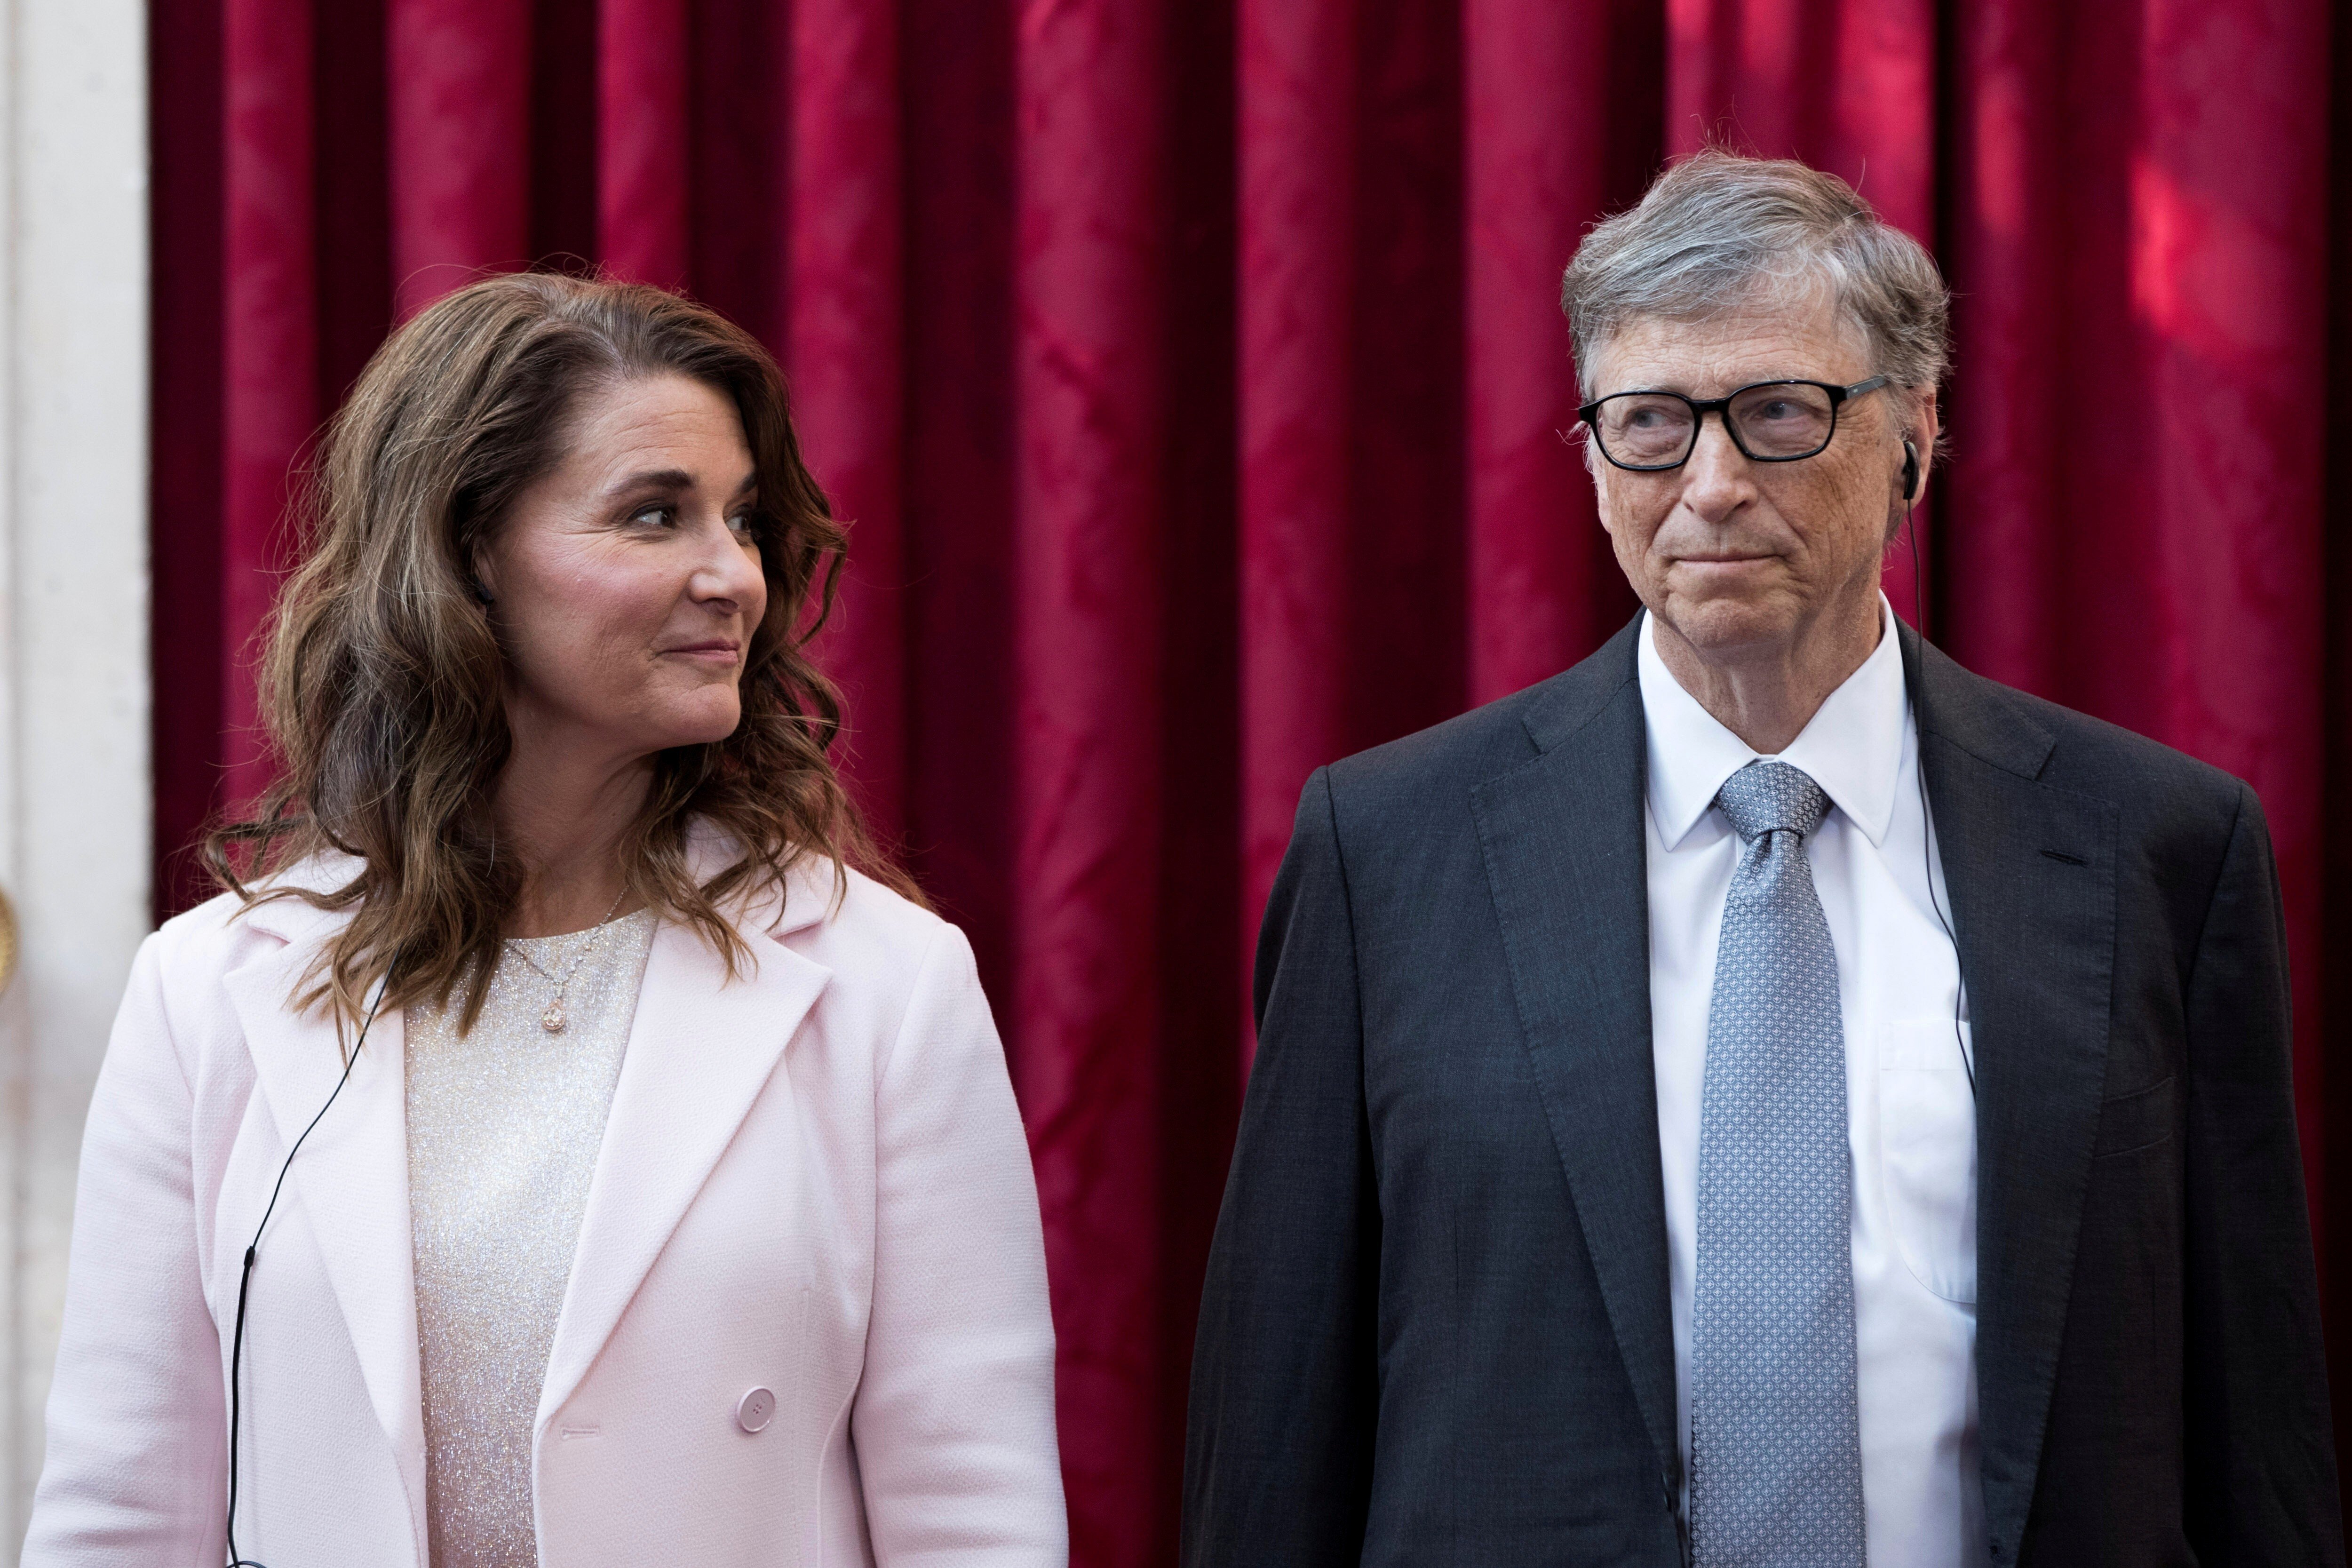 Bill and Melinda Gates, pictured in 2017, met in 1987 when Melinda started working at Microsoft as a product manager. Photo: Reuters